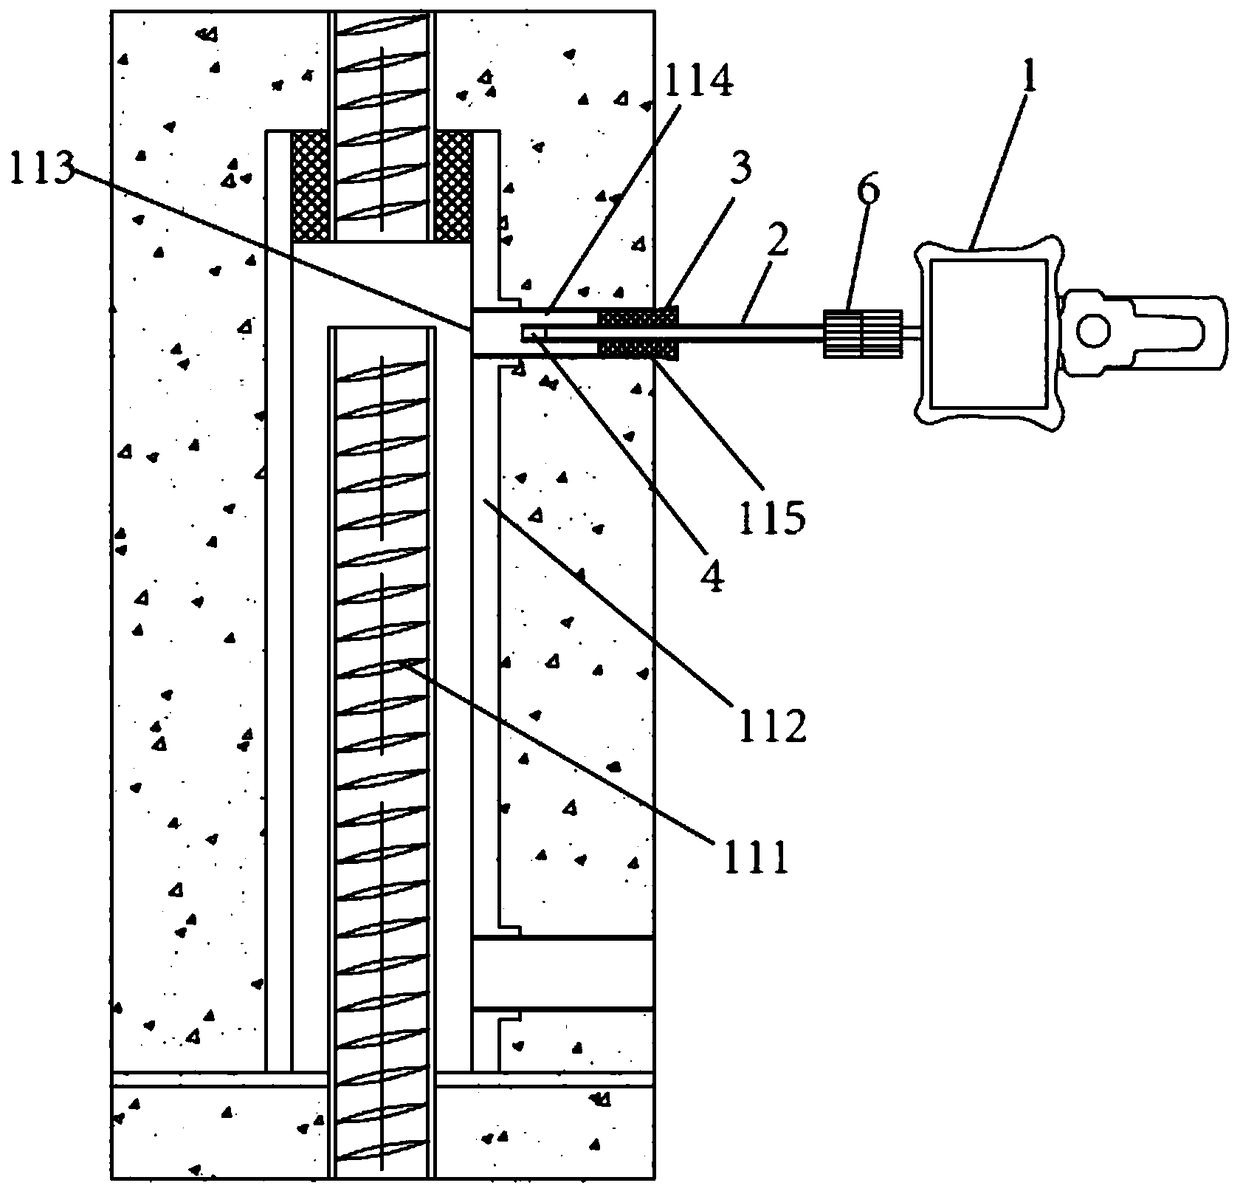 Method for detecting insertion depth of connecting steel bar in semi-grouting sleeve steel bar joint